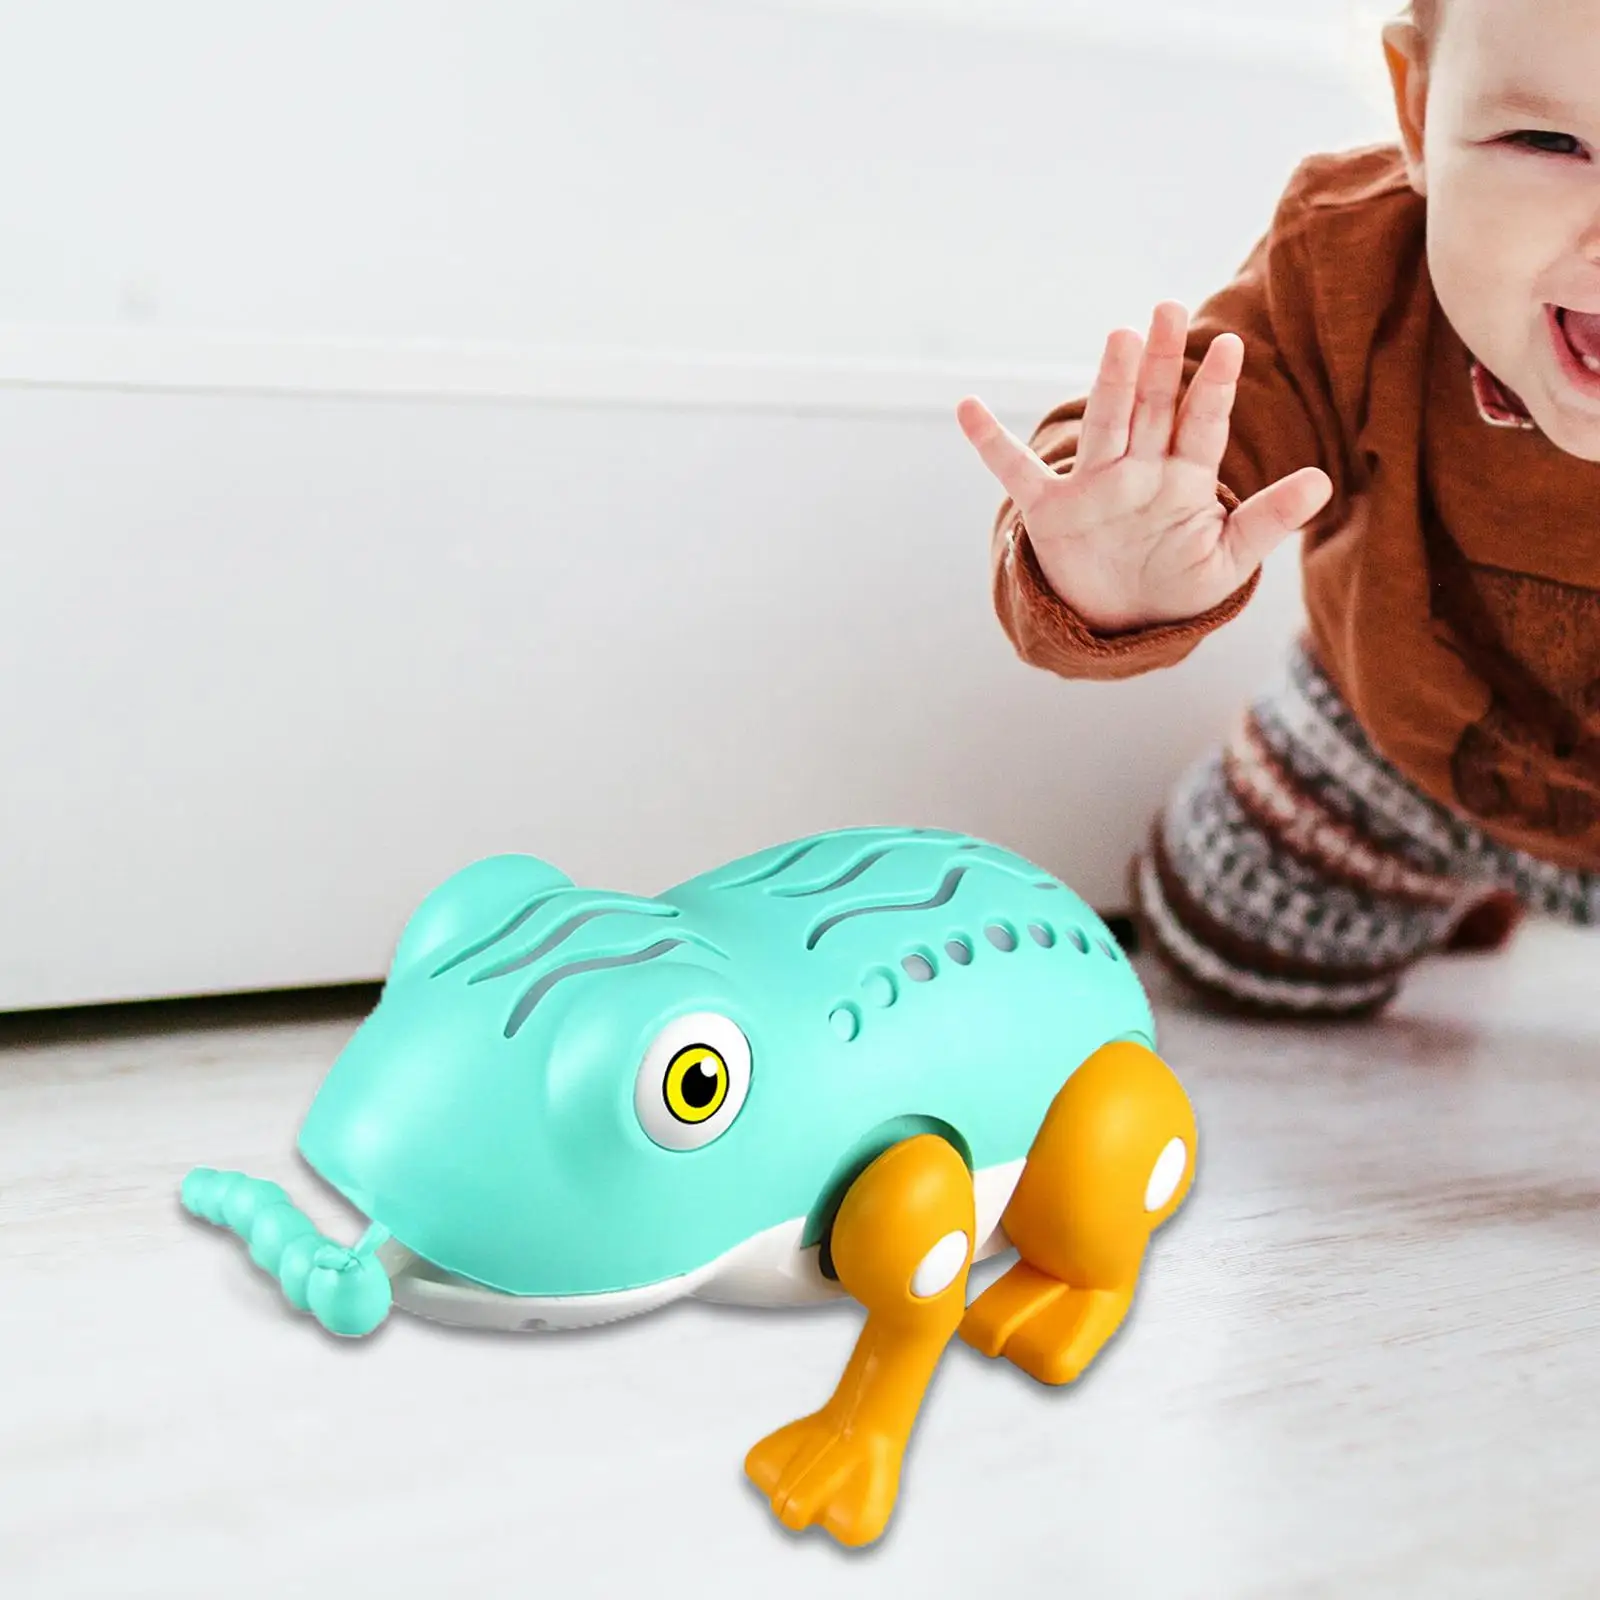 Dancing Frog Toy Light up Dancing Toy for Kids 1+ Boys Girls Unisex Children Birthday Gifts